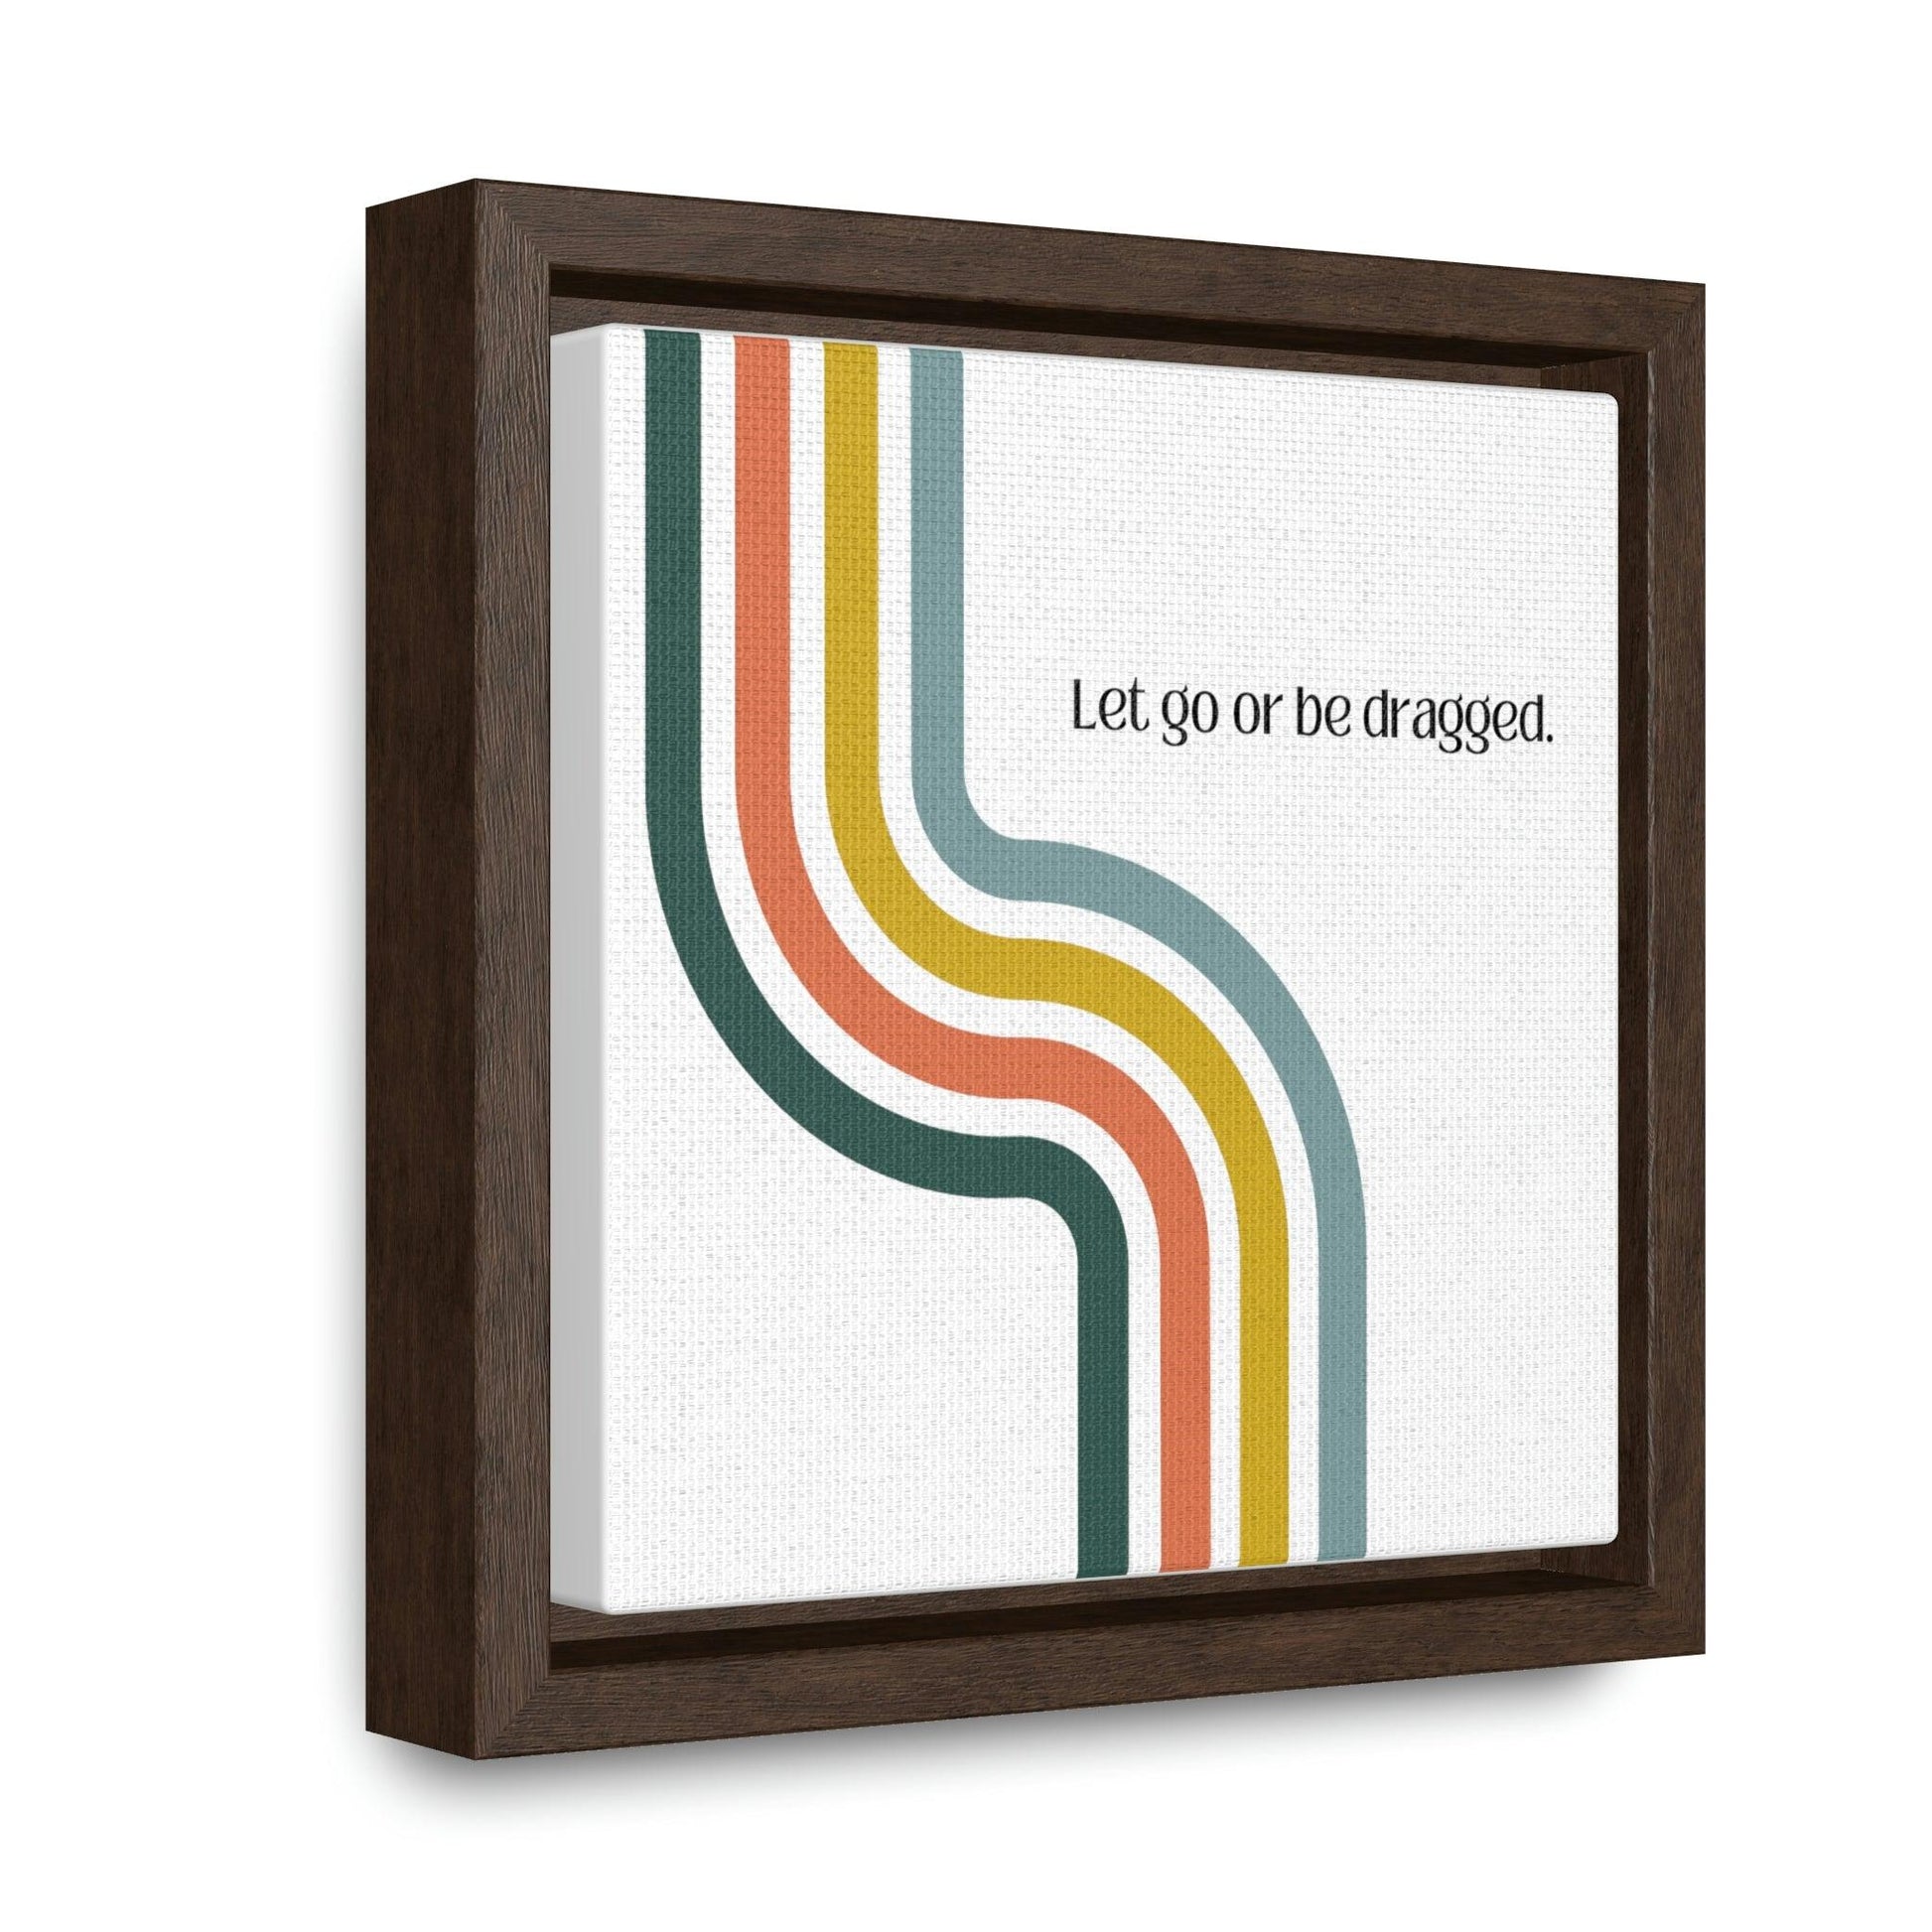 Let go or be dragged - Gallery Canvas Wraps, Square Frame - Moxie Graphics